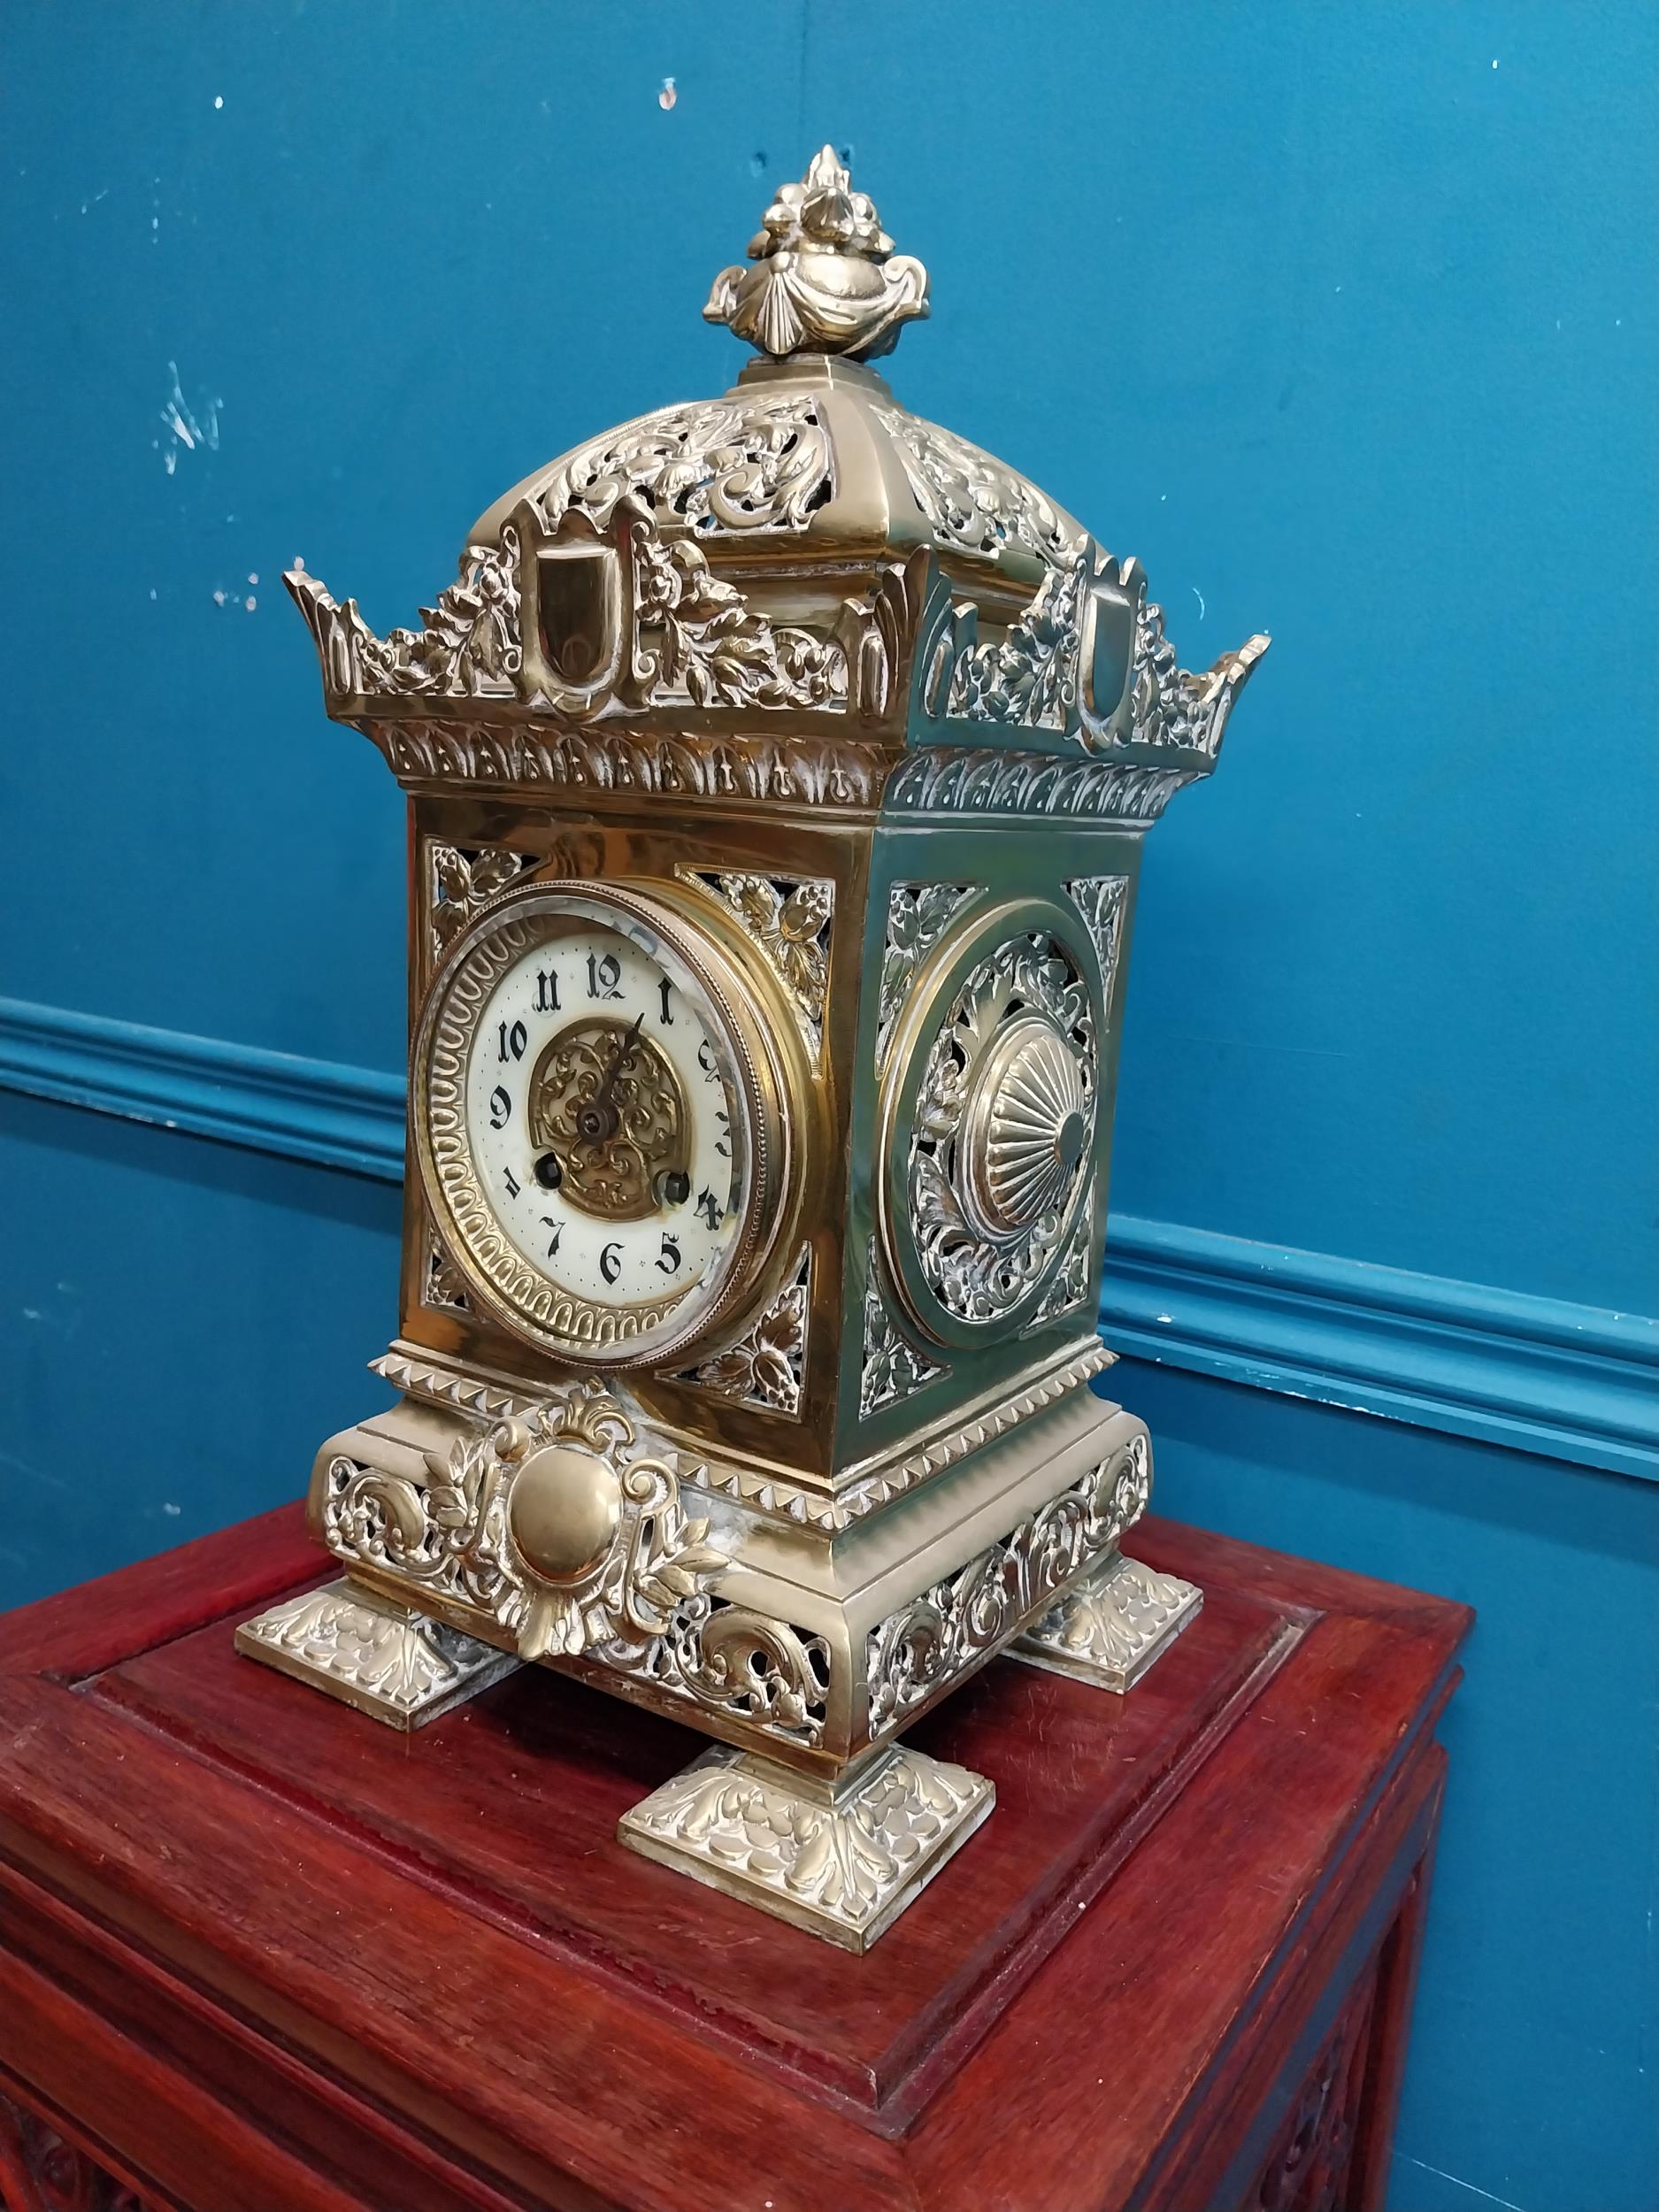 Decorative brass mantle clock in the Victorian style {39 cm H x 19 cm W x 19 cm D}. - Image 2 of 9